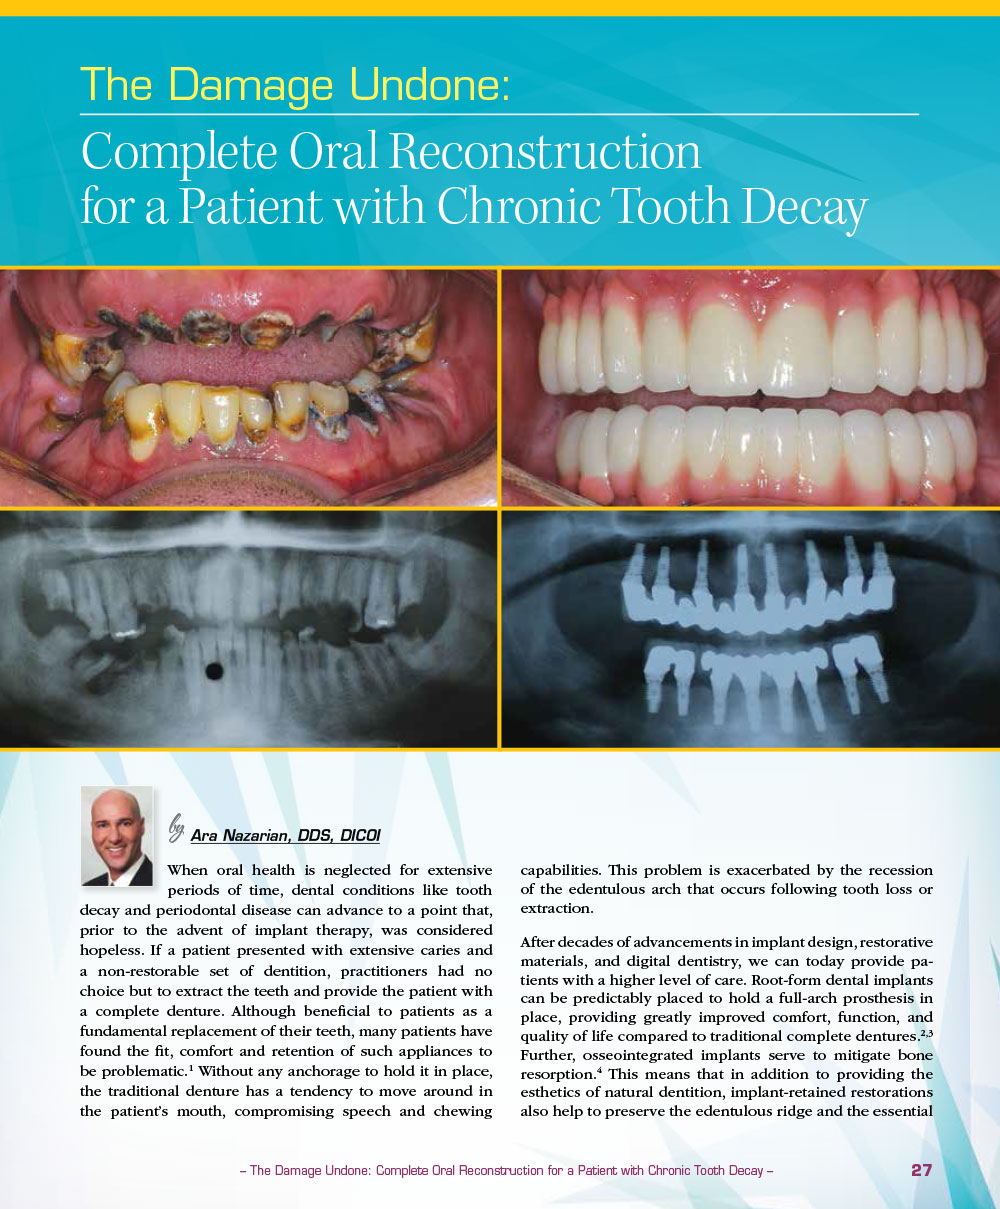 The Damage Undone: Complete Oral Reconstruction for a Patient with Chronic Tooth Decay